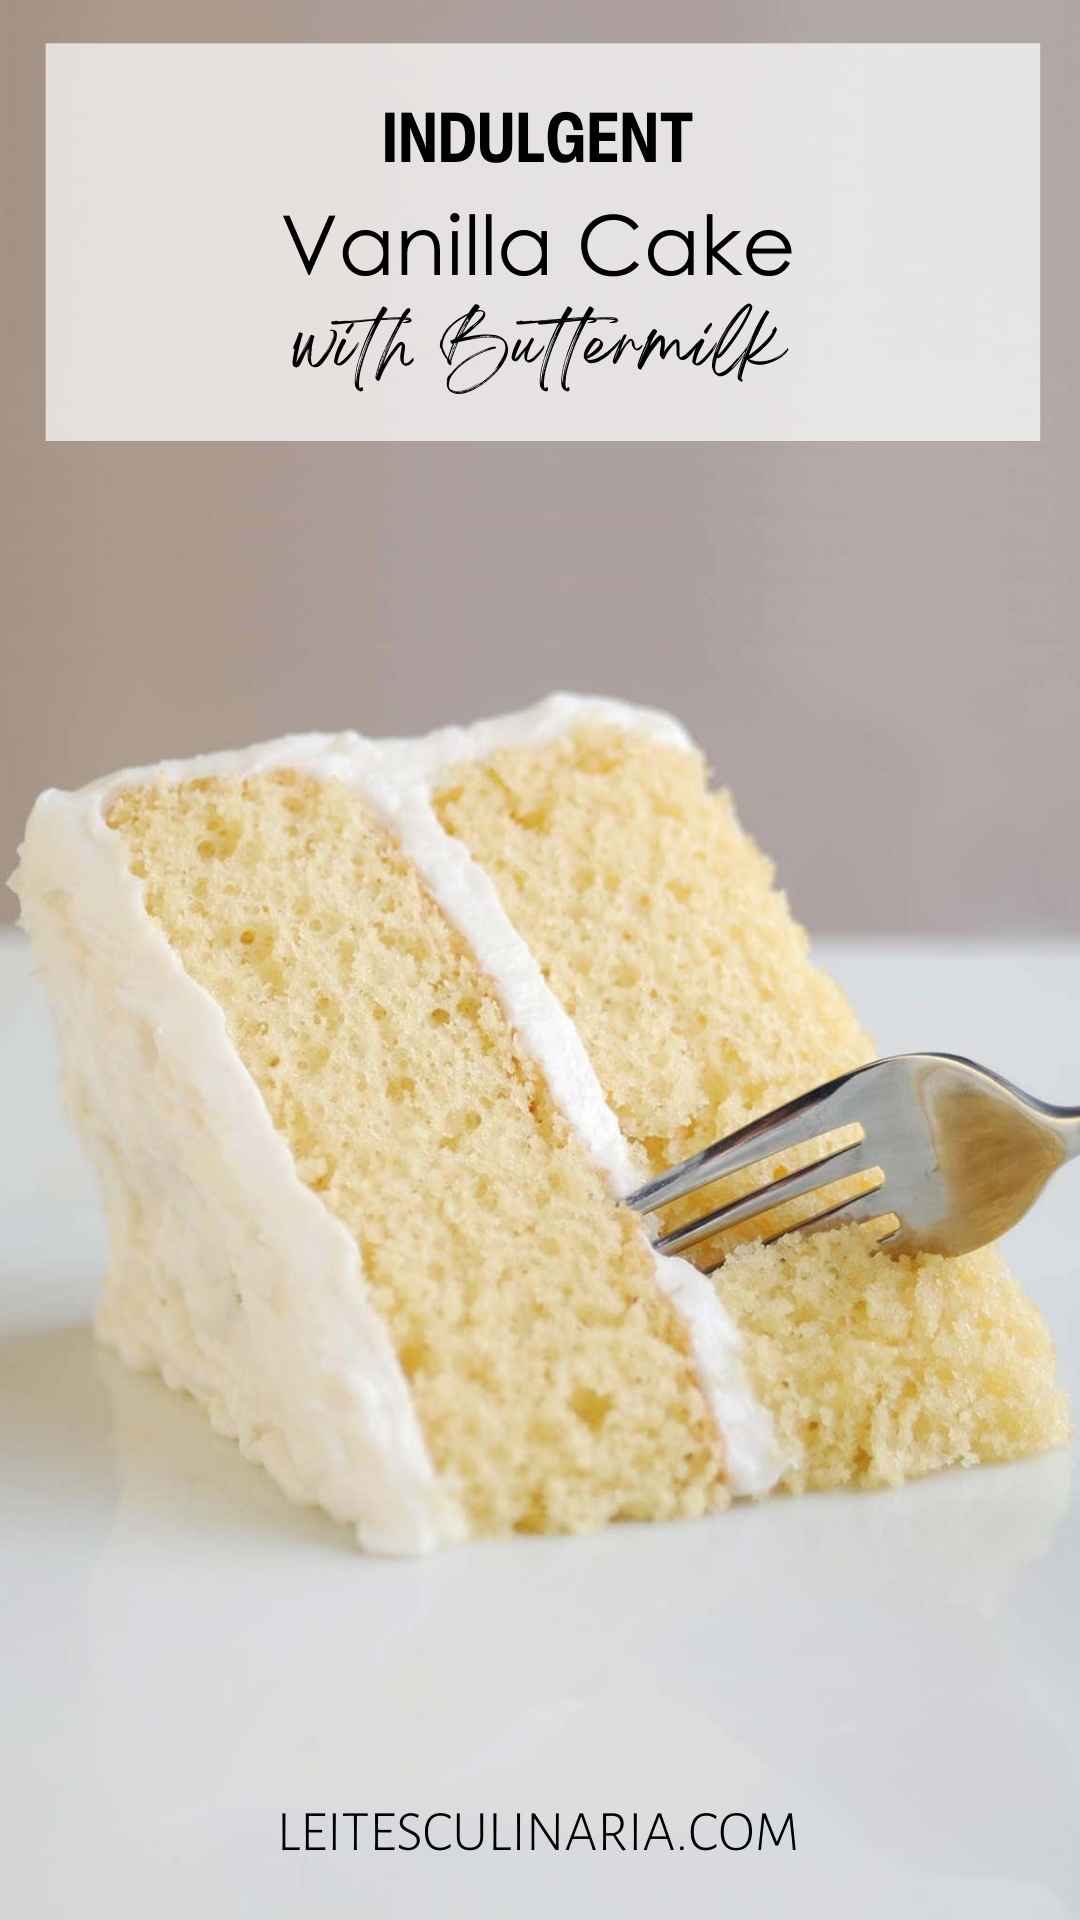 A slice of two-layer white cake with white frosting.